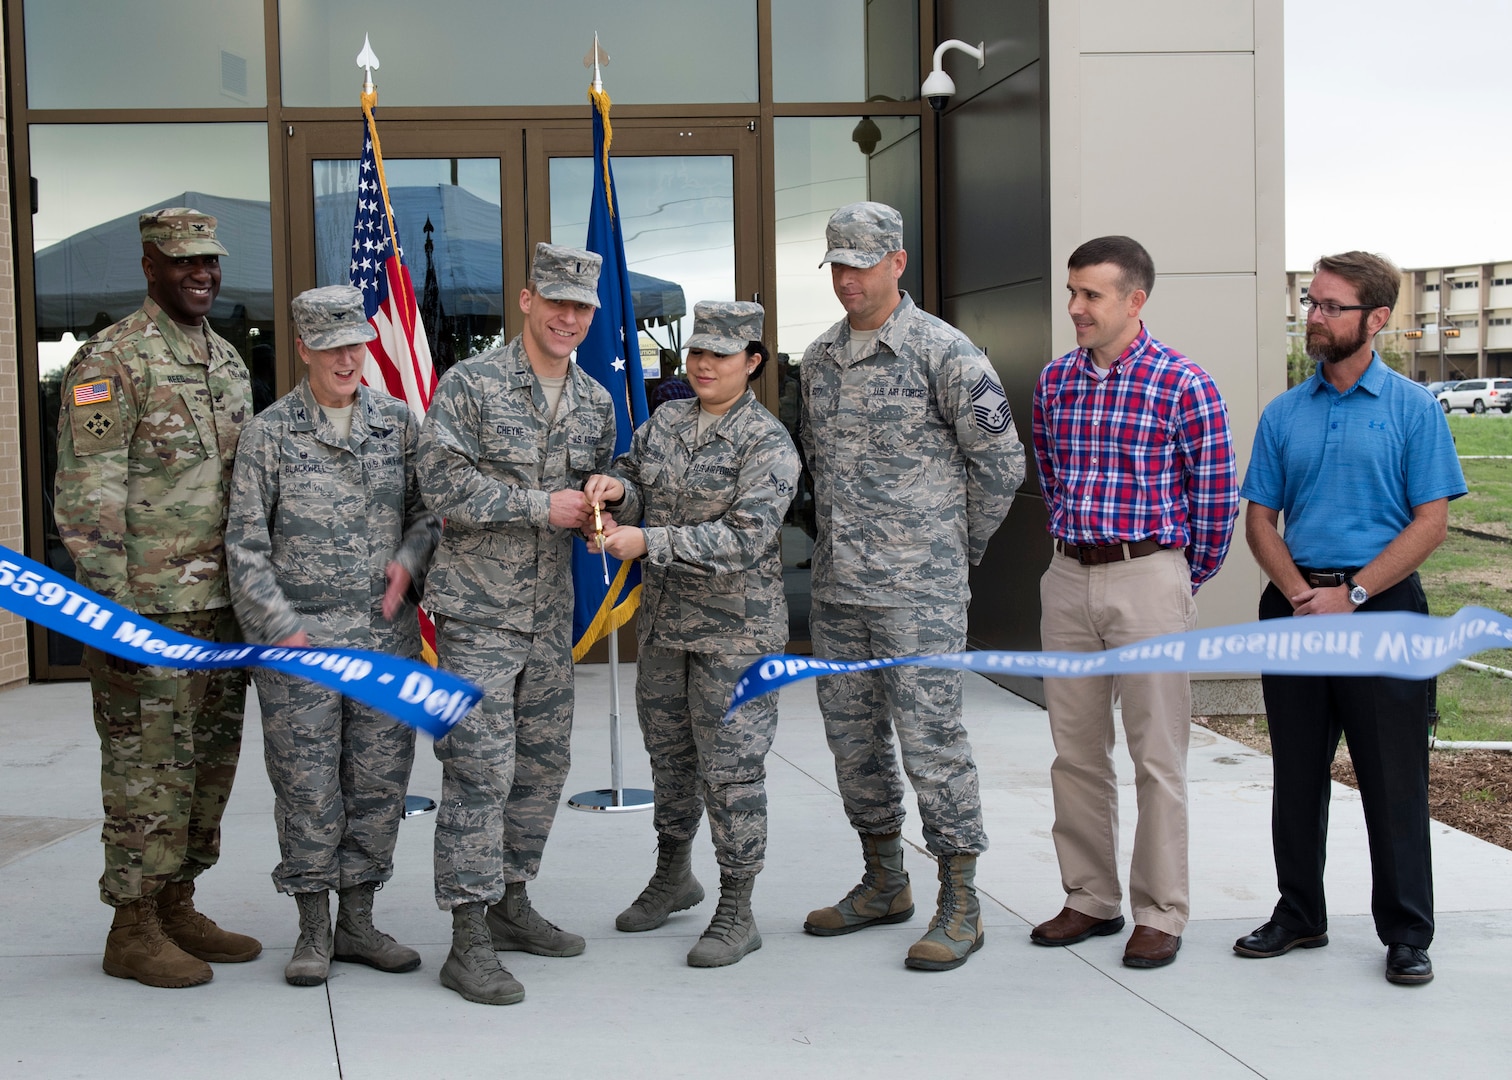 Members from the 559th Medical Group leadership along with U.S. Army Corps of Engineers, and civilian personnel cut the ribbon during the Sep. 13 opening ceremony for the new Reid Health Services Center on Joint Base San Antonio-Lackland, Texas. The new Reid Clinic incorporates functions from four buildings into one, consisting of 19 departments, and will serve approximately 86,000 patients per year. (U.S. Air Force photo by Staff Sgt. Kevin Iinuma)